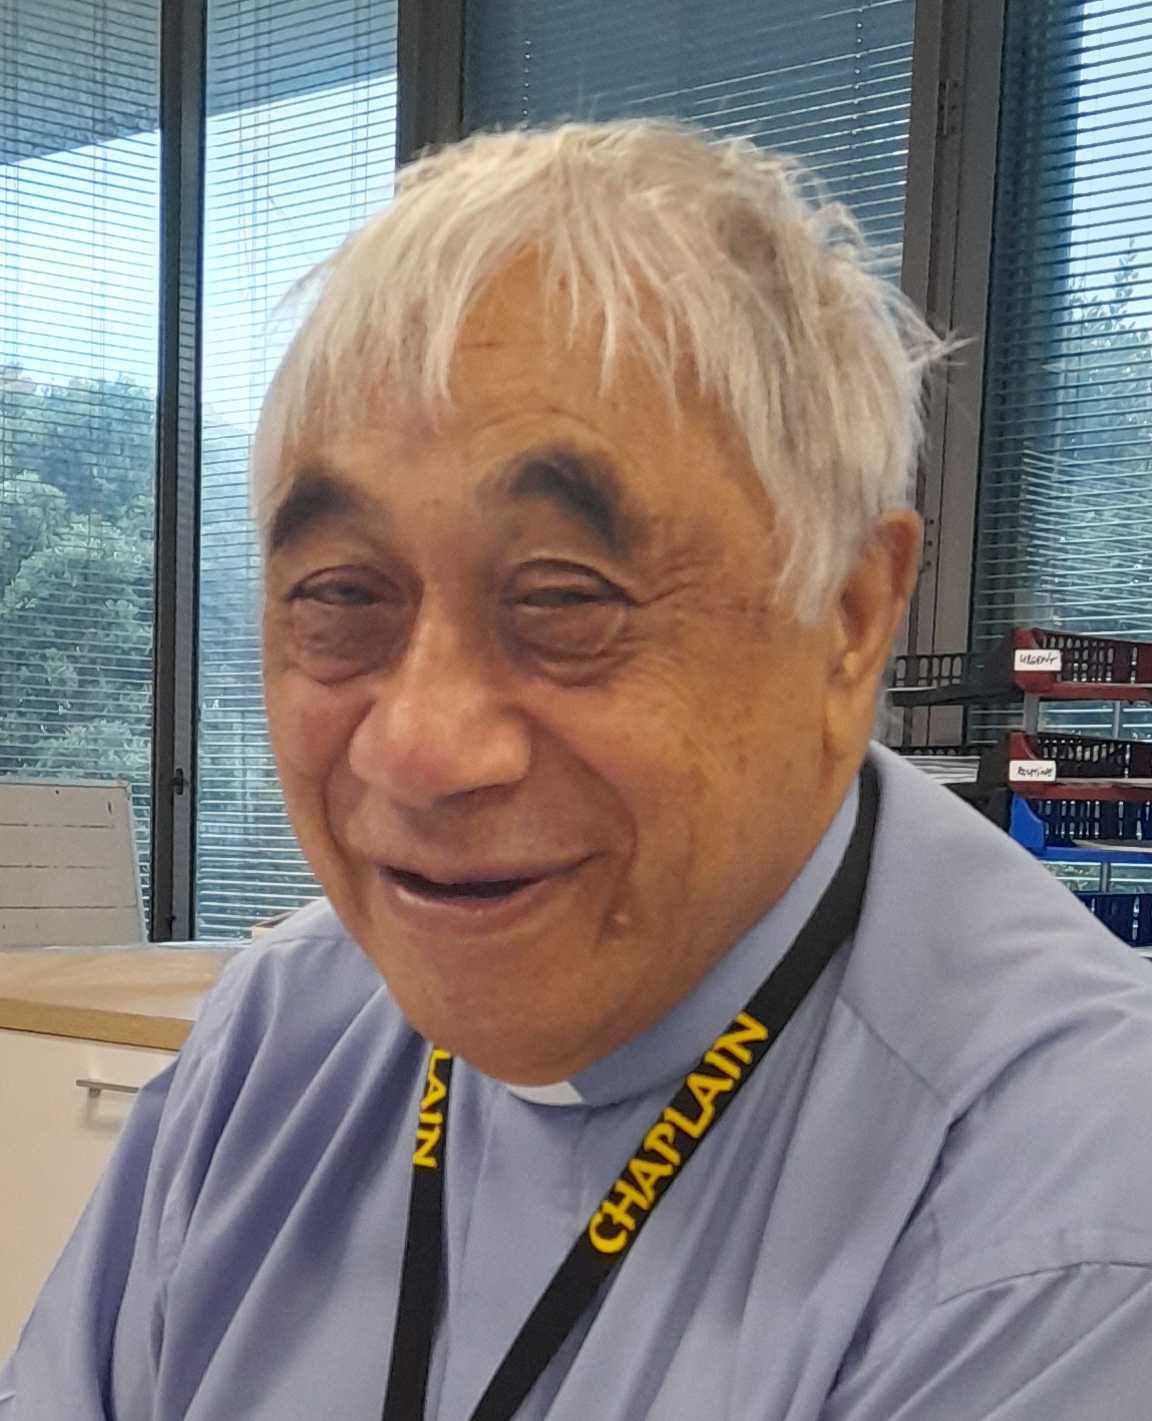 Head and shoulders photo of Don Rangi smiling